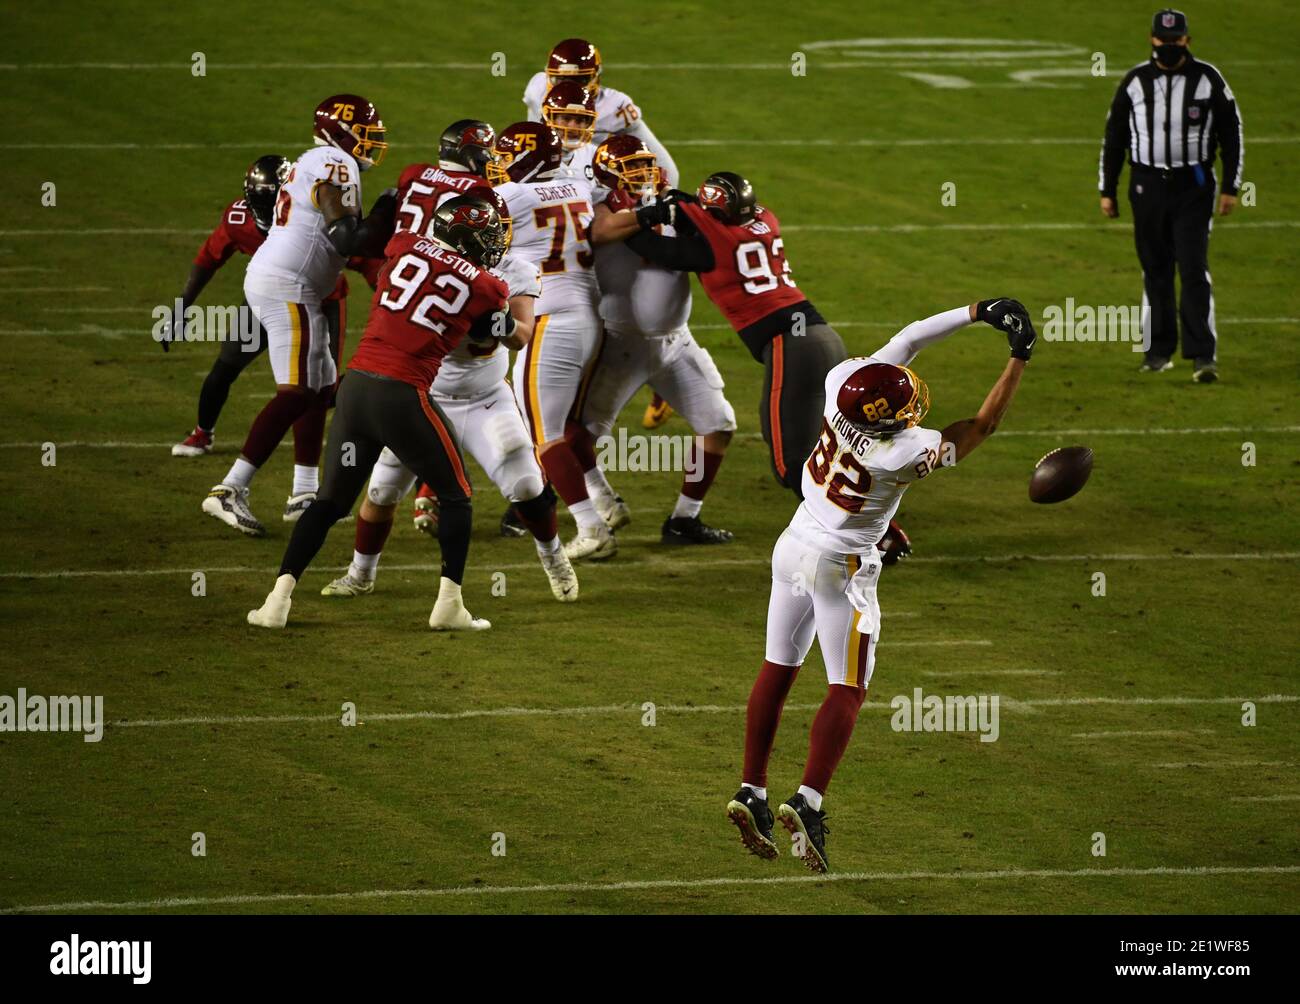 Landover, United States. 10th Jan, 2021. Washington Football Team tight end Logan Thomas (82) misses a pass against the Tampa Bay Buccaneers in the second half of a wild card playoff game at FedEx Field in Landover, Maryland on Saturday, January 9, 2021. The Buccaneers defeated the Washington Football Team 31-23. Photo by Kevin Dietsch/UPI. Credit: UPI/Alamy Live News Stock Photo